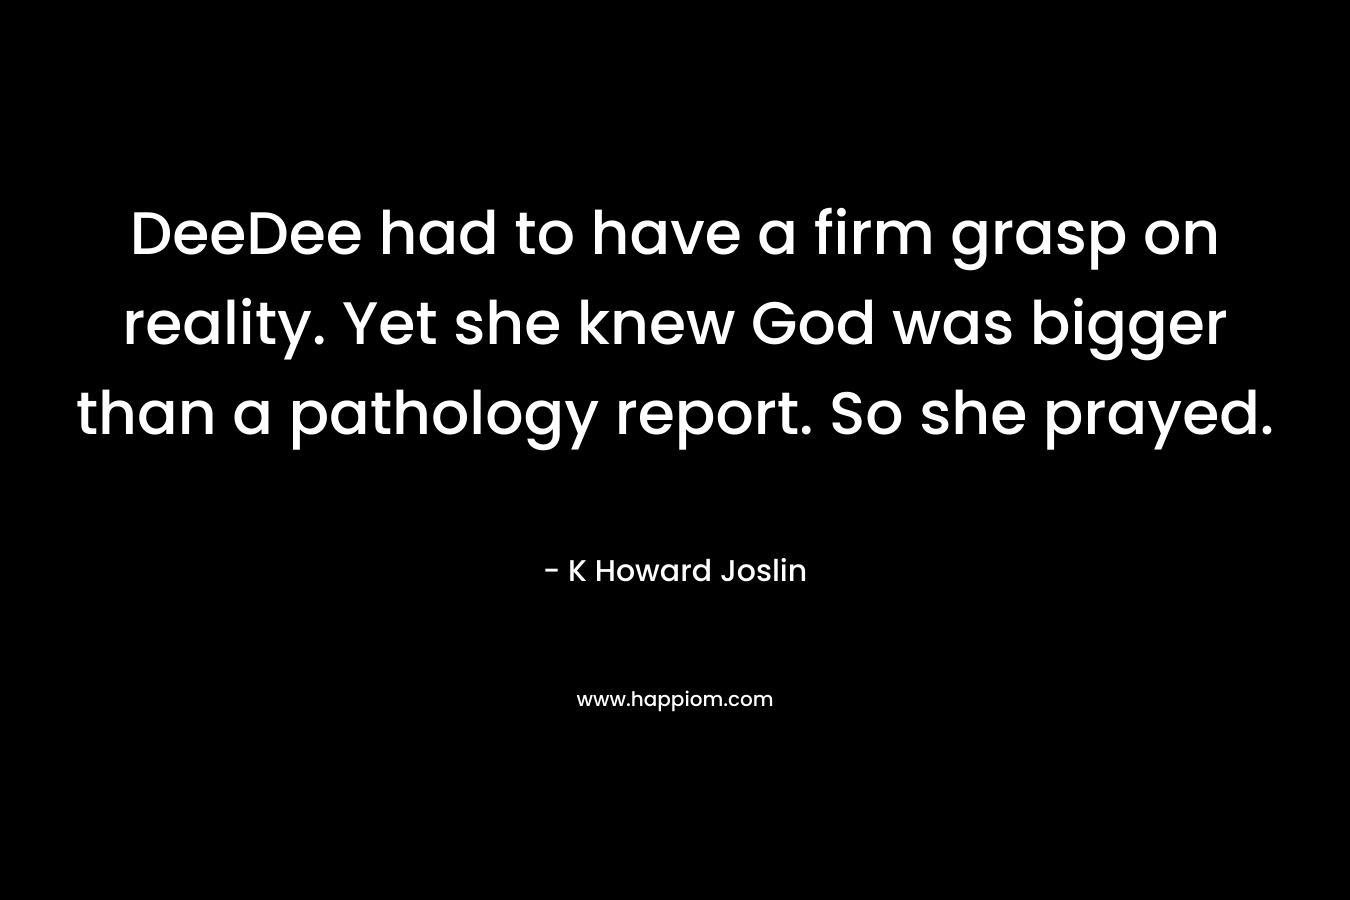 DeeDee had to have a firm grasp on reality. Yet she knew God was bigger than a pathology report. So she prayed. – K Howard Joslin